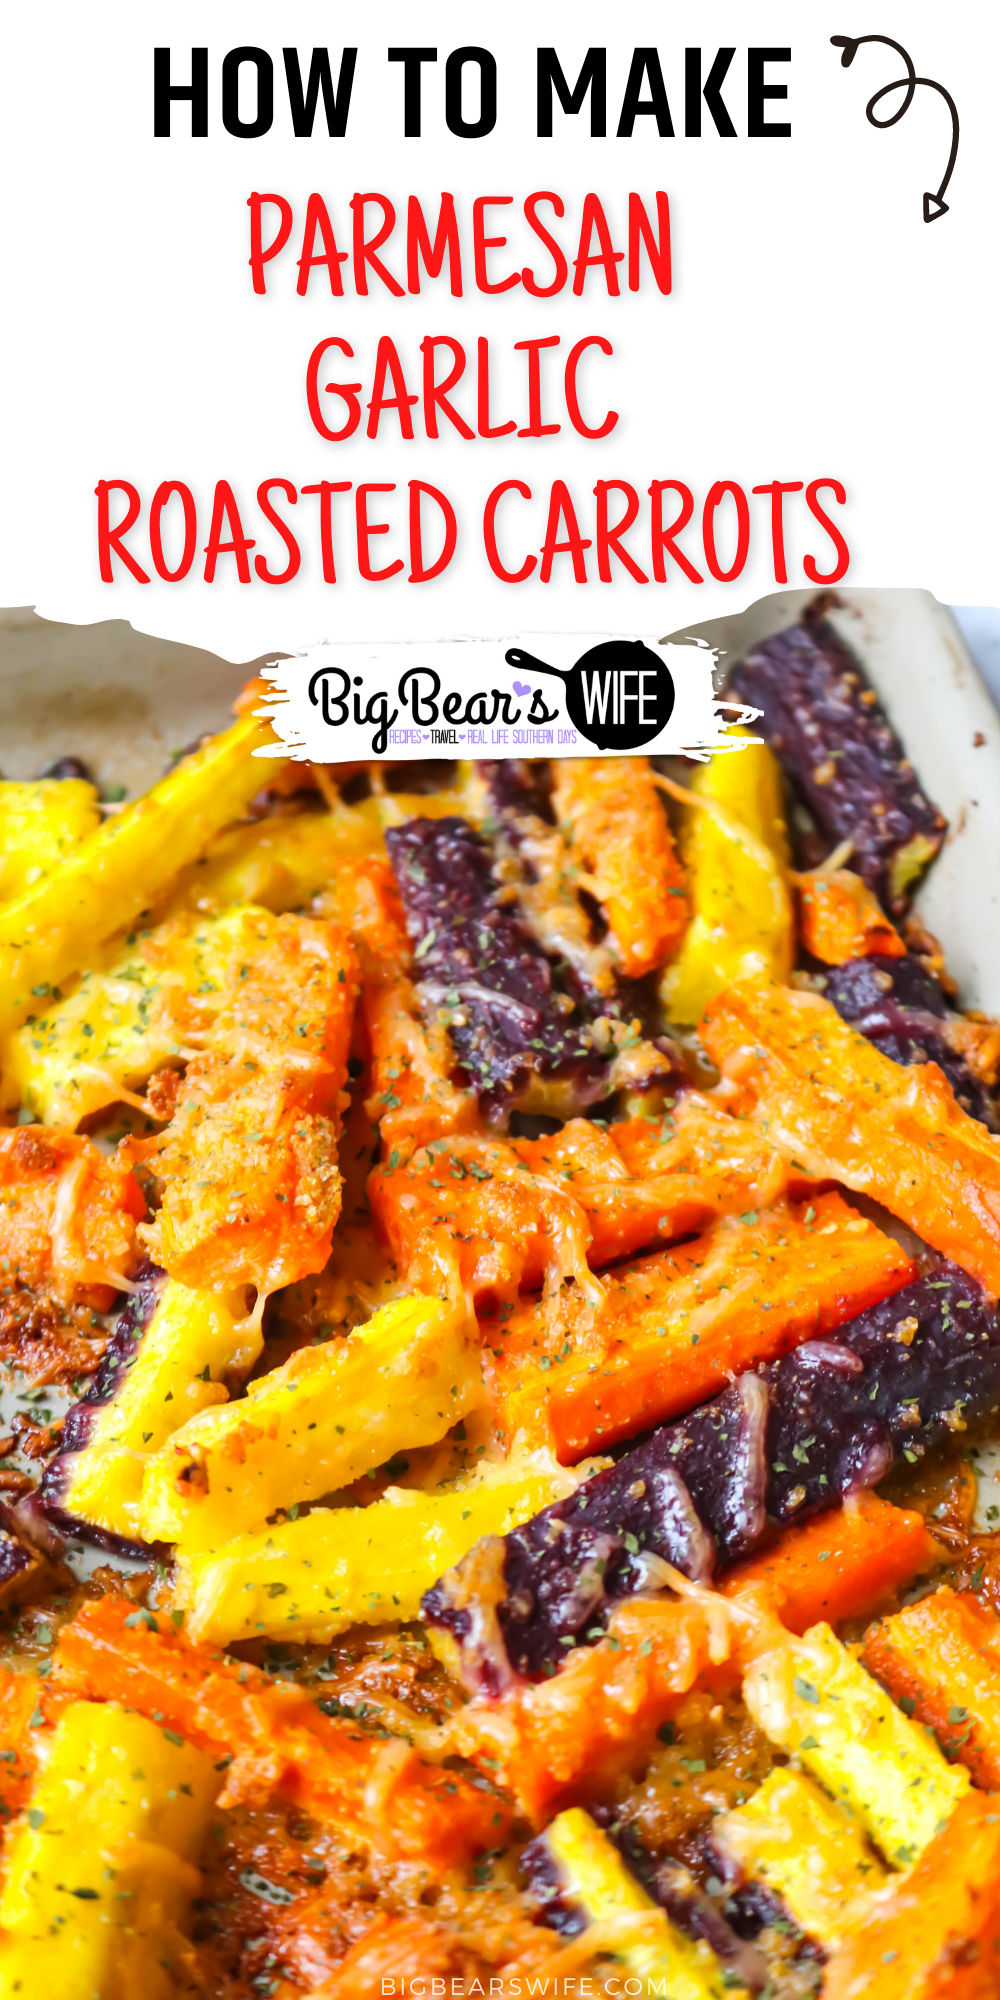 If you love oven roasted carrots, garlic and parmesan cheese then you're going to love these easy Parmesan Garlic Roasted Carrots! The Perfect side dish for a weeknight or weekend meal! via @bigbearswife